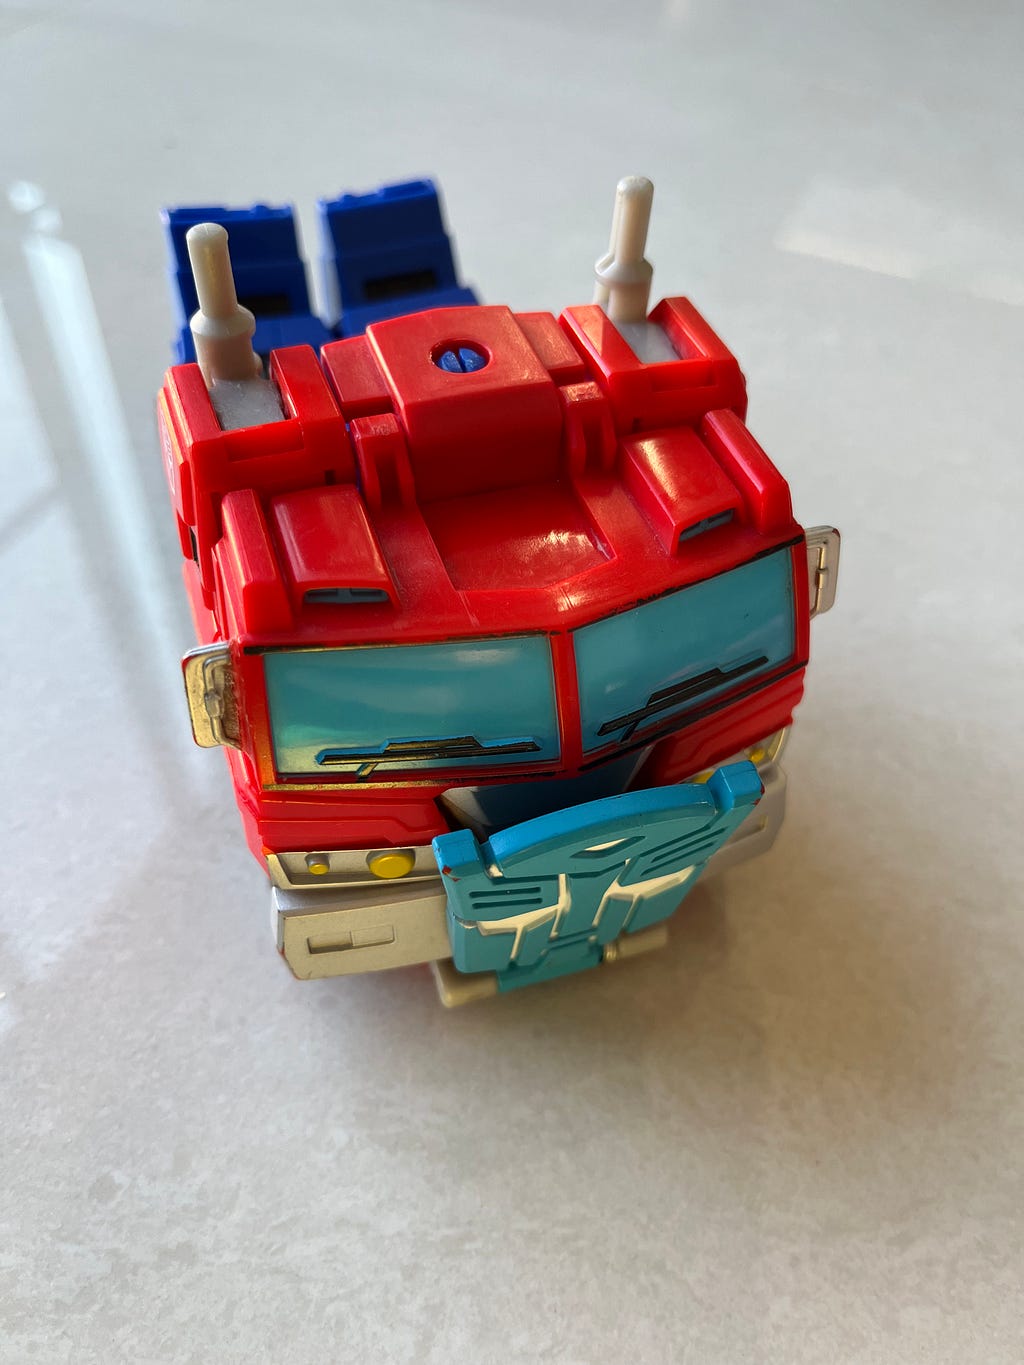 Transformer Optimus Prime which was transformed by me and Mr McWang the most upon the son’s demands given he was too young to play… even though he was the one who wanted to get it.